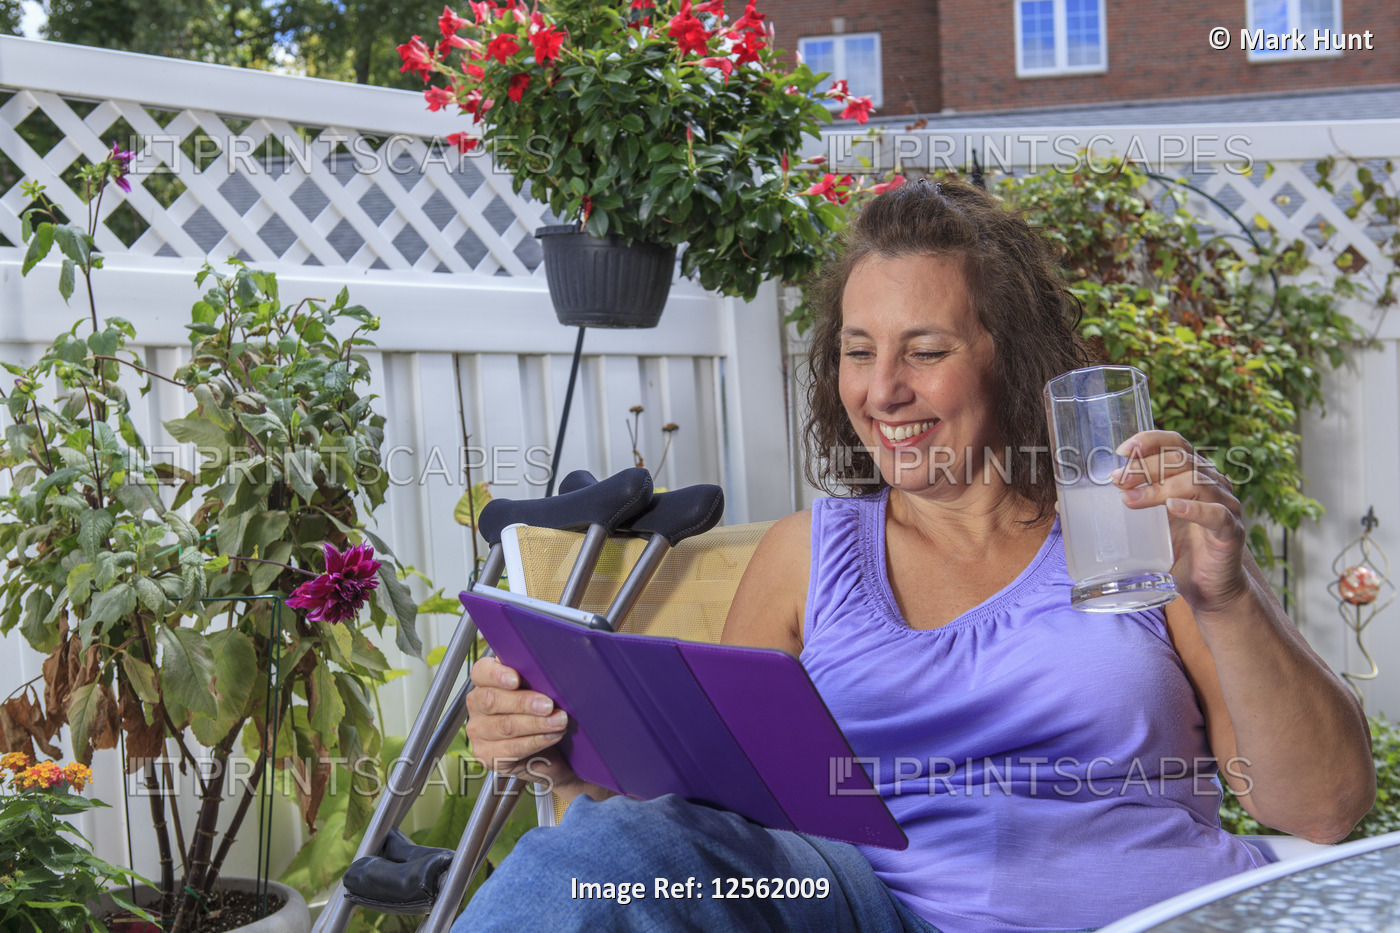 Woman with Spina Bifida on patio working on tablet and enjoying drink